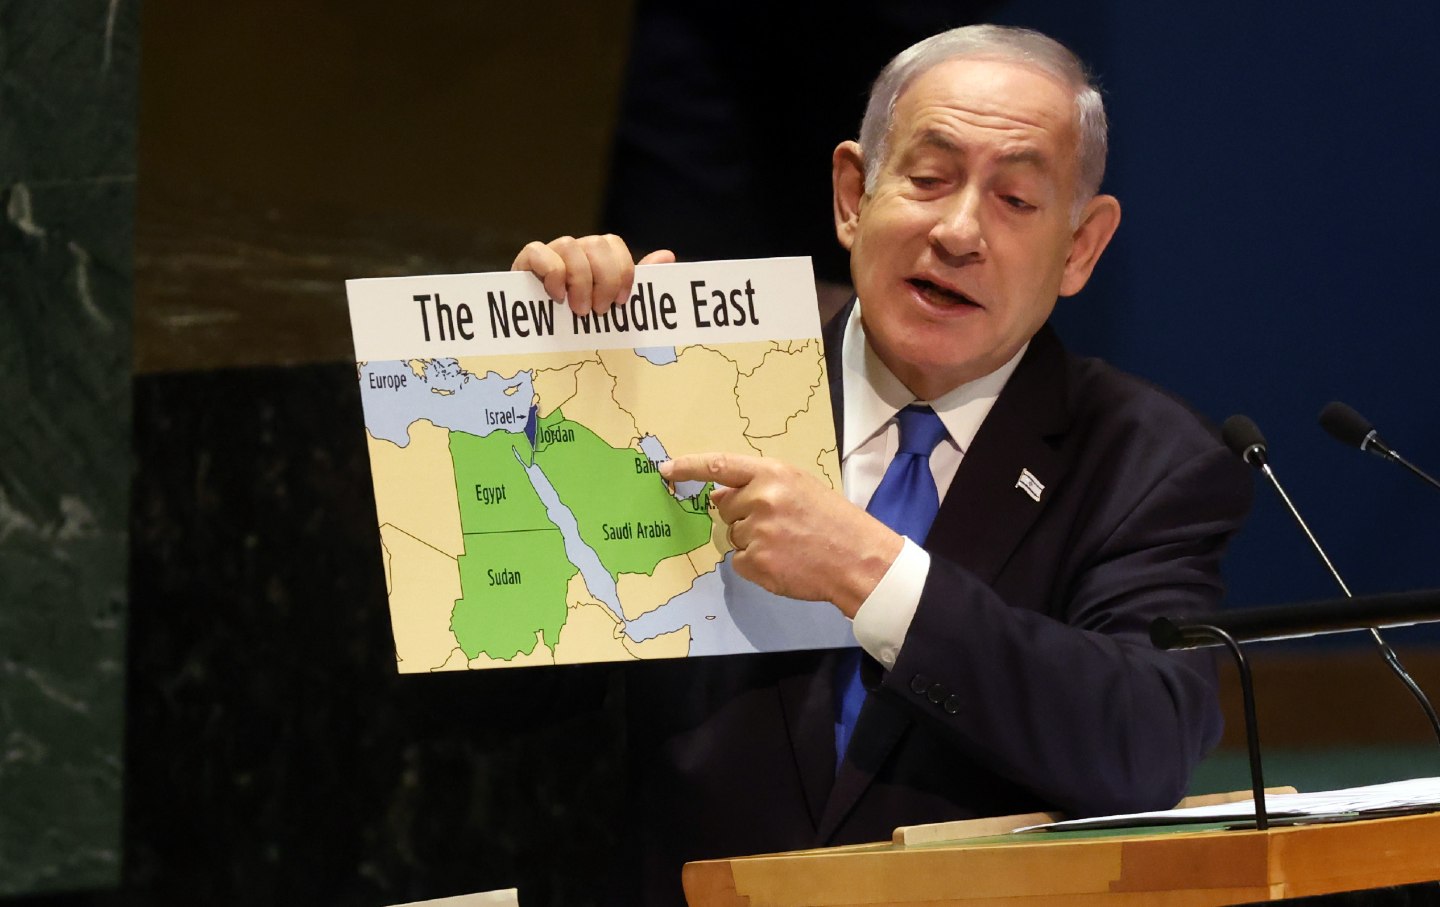 During a speech before the United Nations General Assembly on September 22, 2023, Prime Minister Benjamin Netanyahu holds up a map that shows Israel stretching “from the river to the sea.”